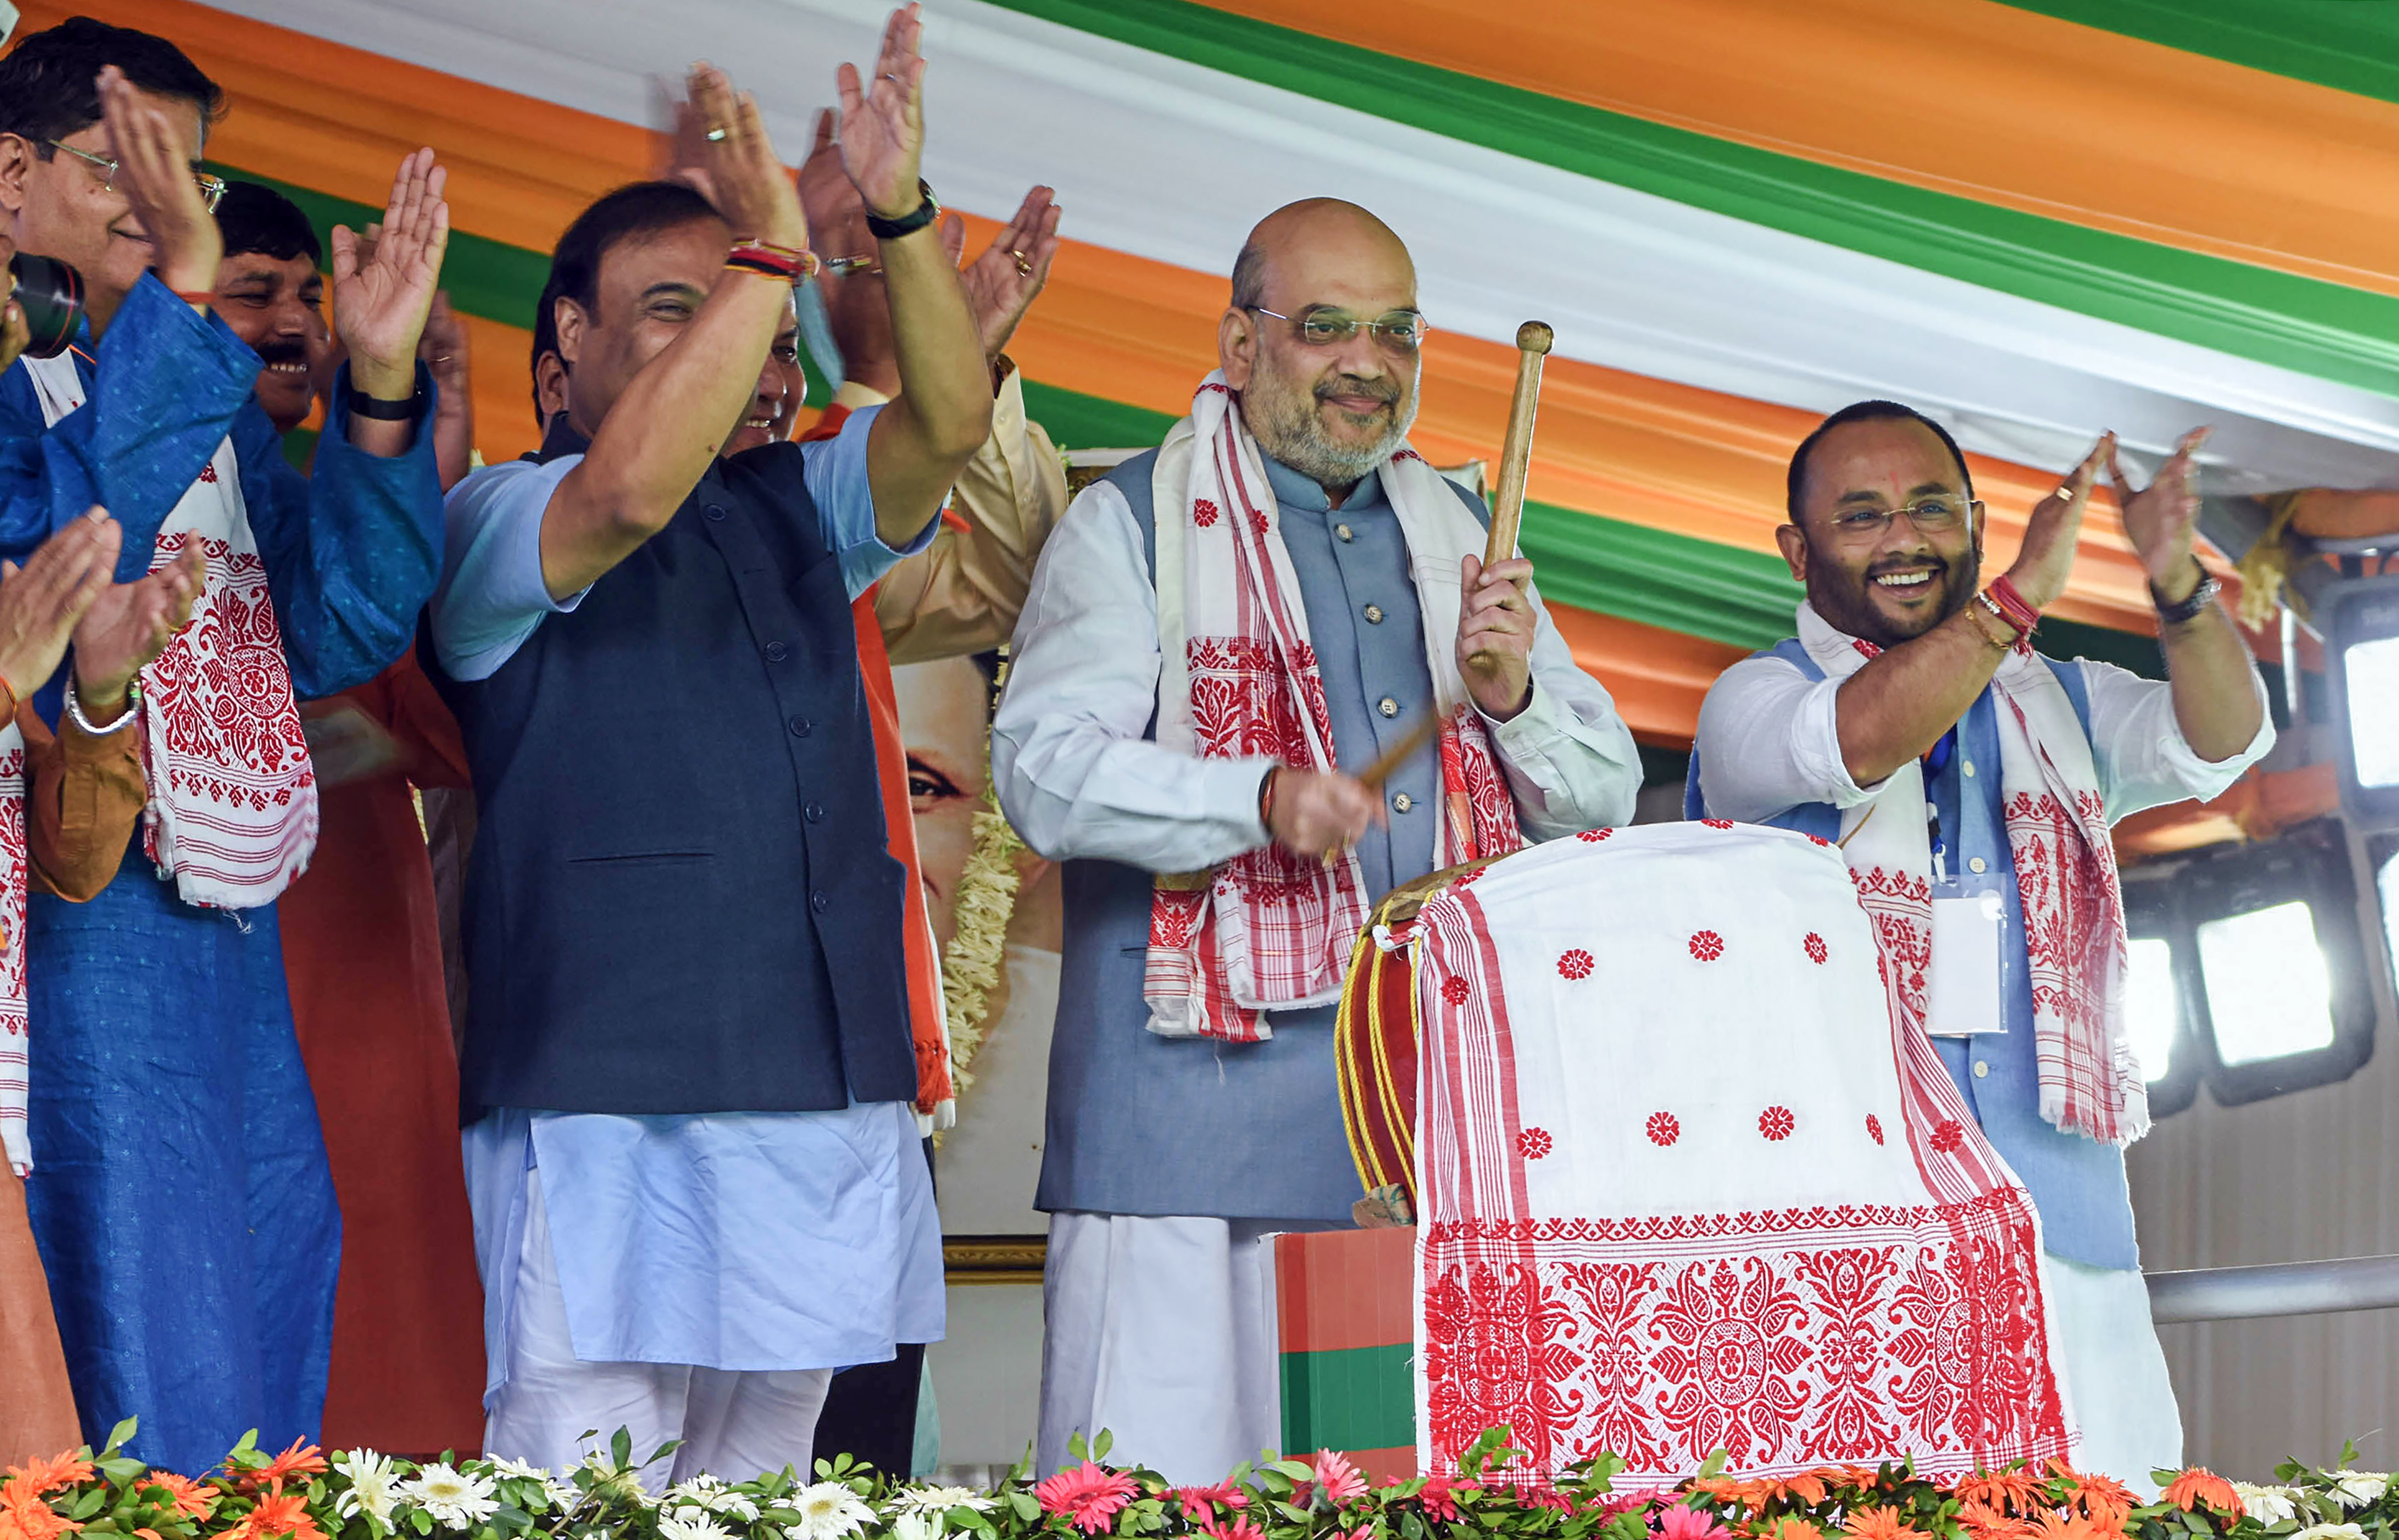 AFSPA to be revoked from all Assam districts soon, says Amit Shah